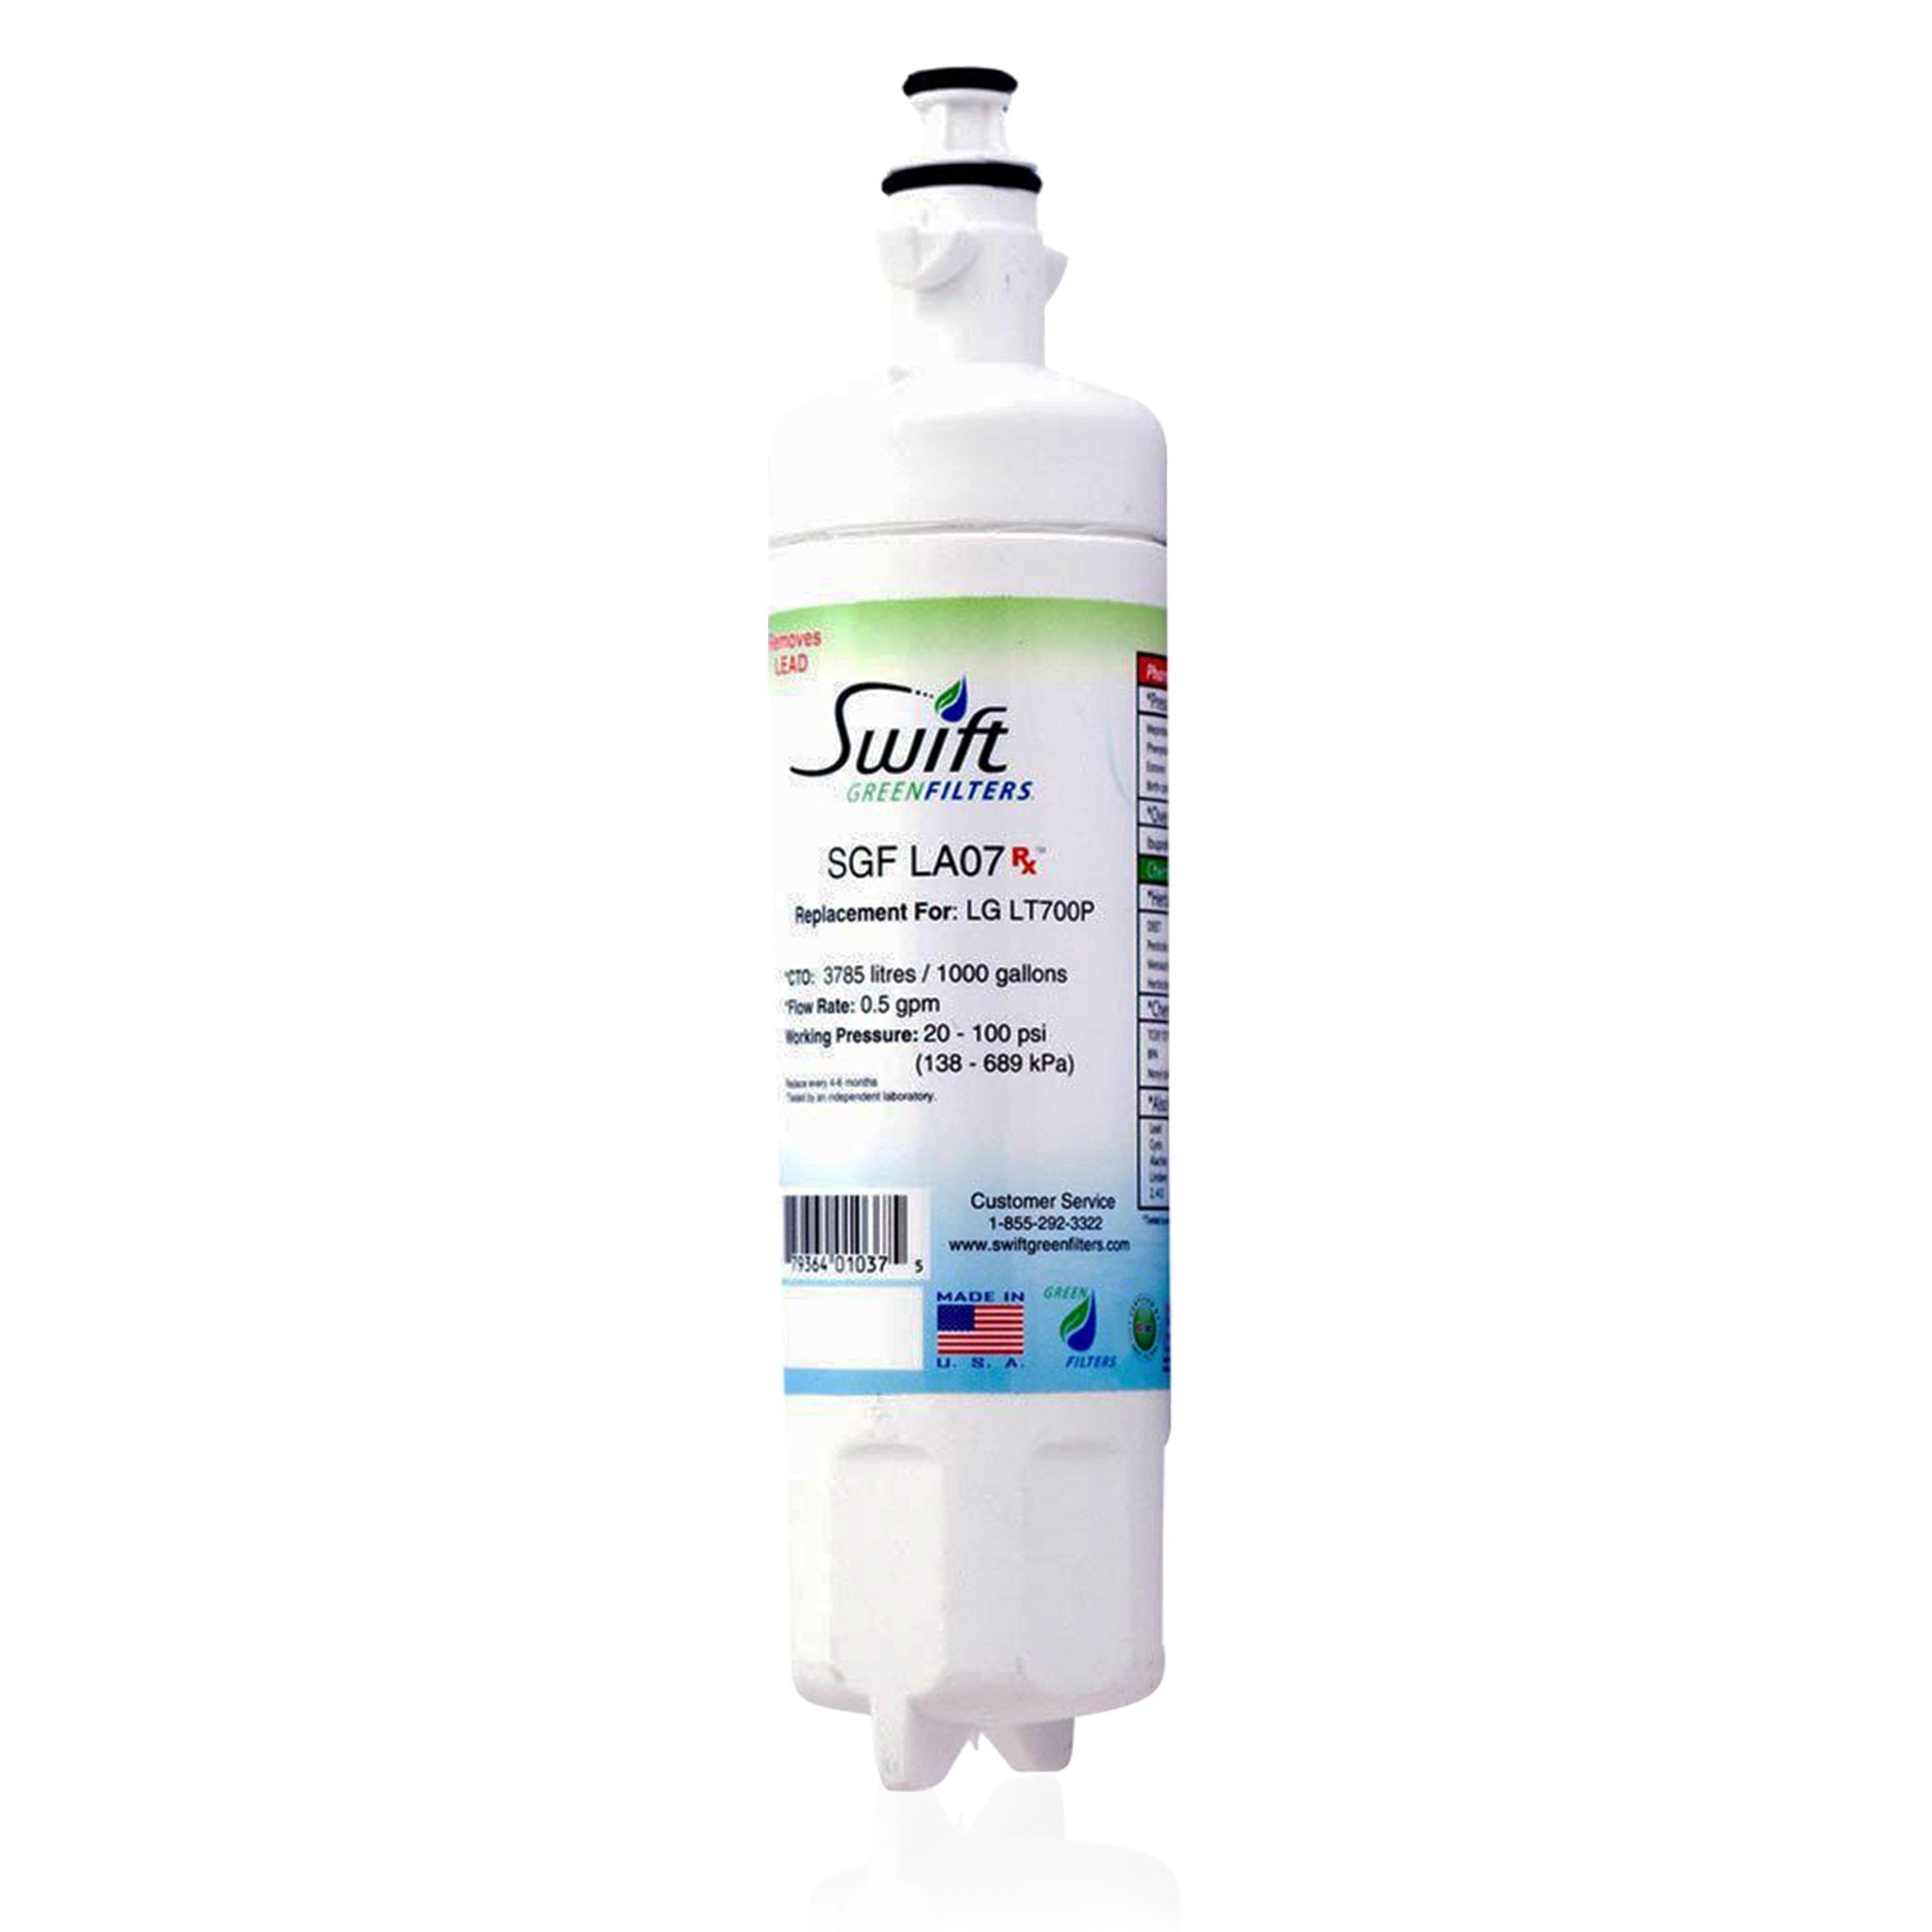 Swift Green Filter SGF-LA07 Rx Pharmaceutical Removal Refrigerator Water Filter